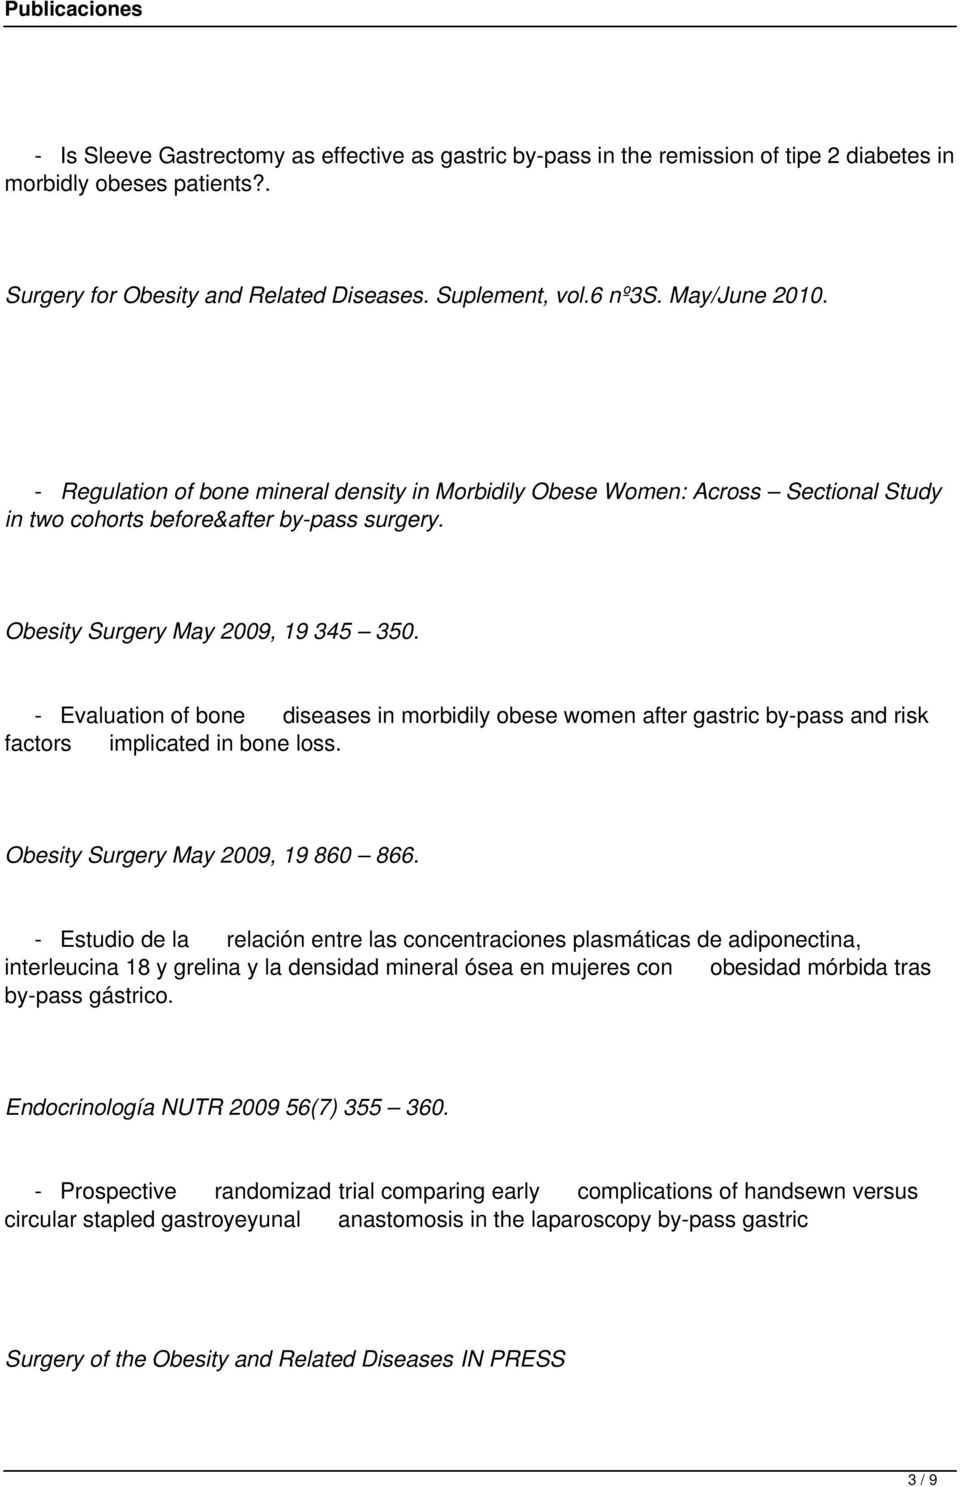 - Evaluation of bone diseases in morbidily obese women after gastric by-pass and risk factors implicated in bone loss. Obesity Surgery May 2009, 19 860 866.